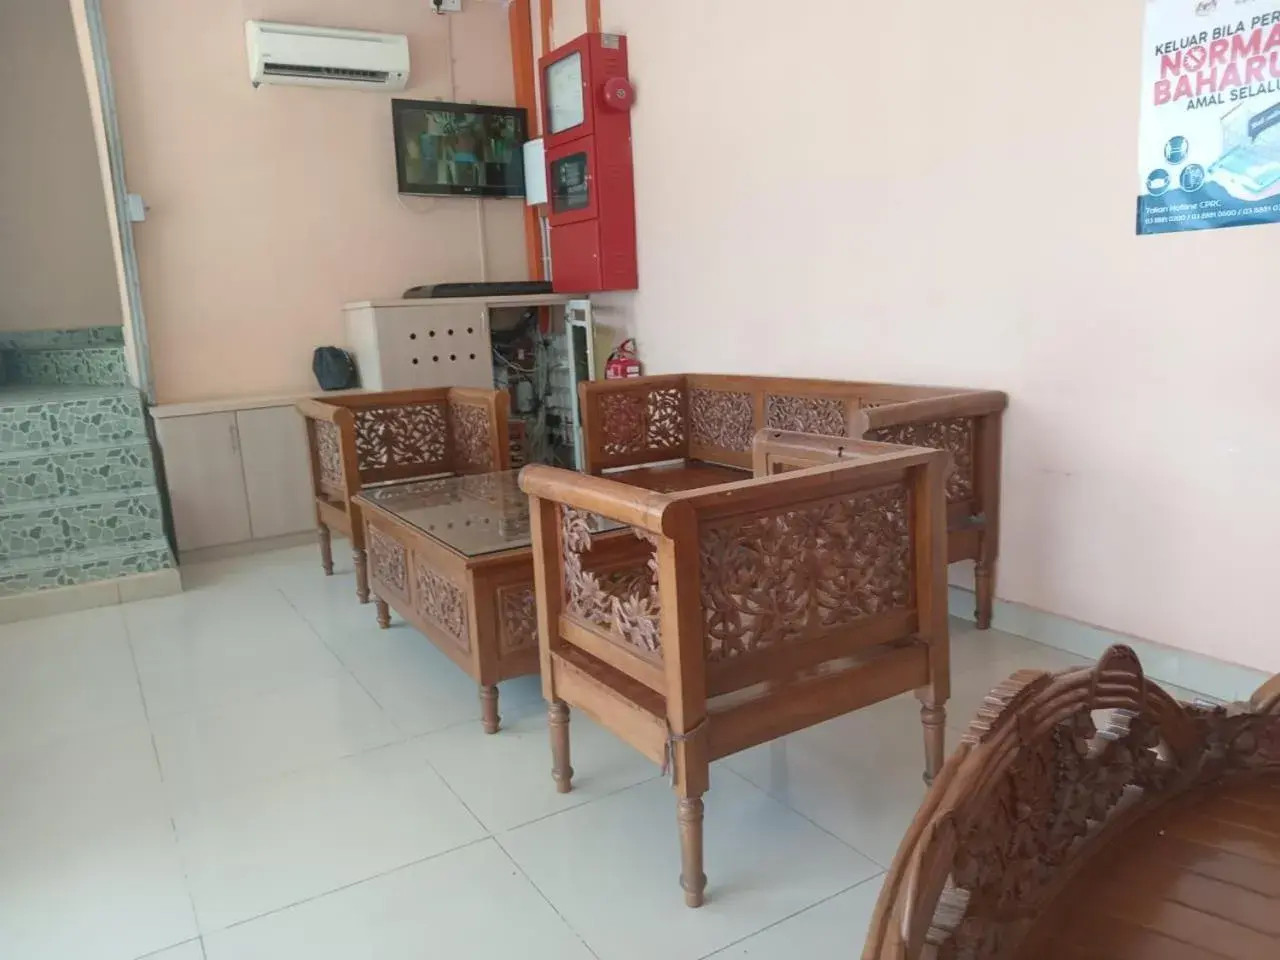 Property building, Seating Area in HOTEL RK CAHAYA